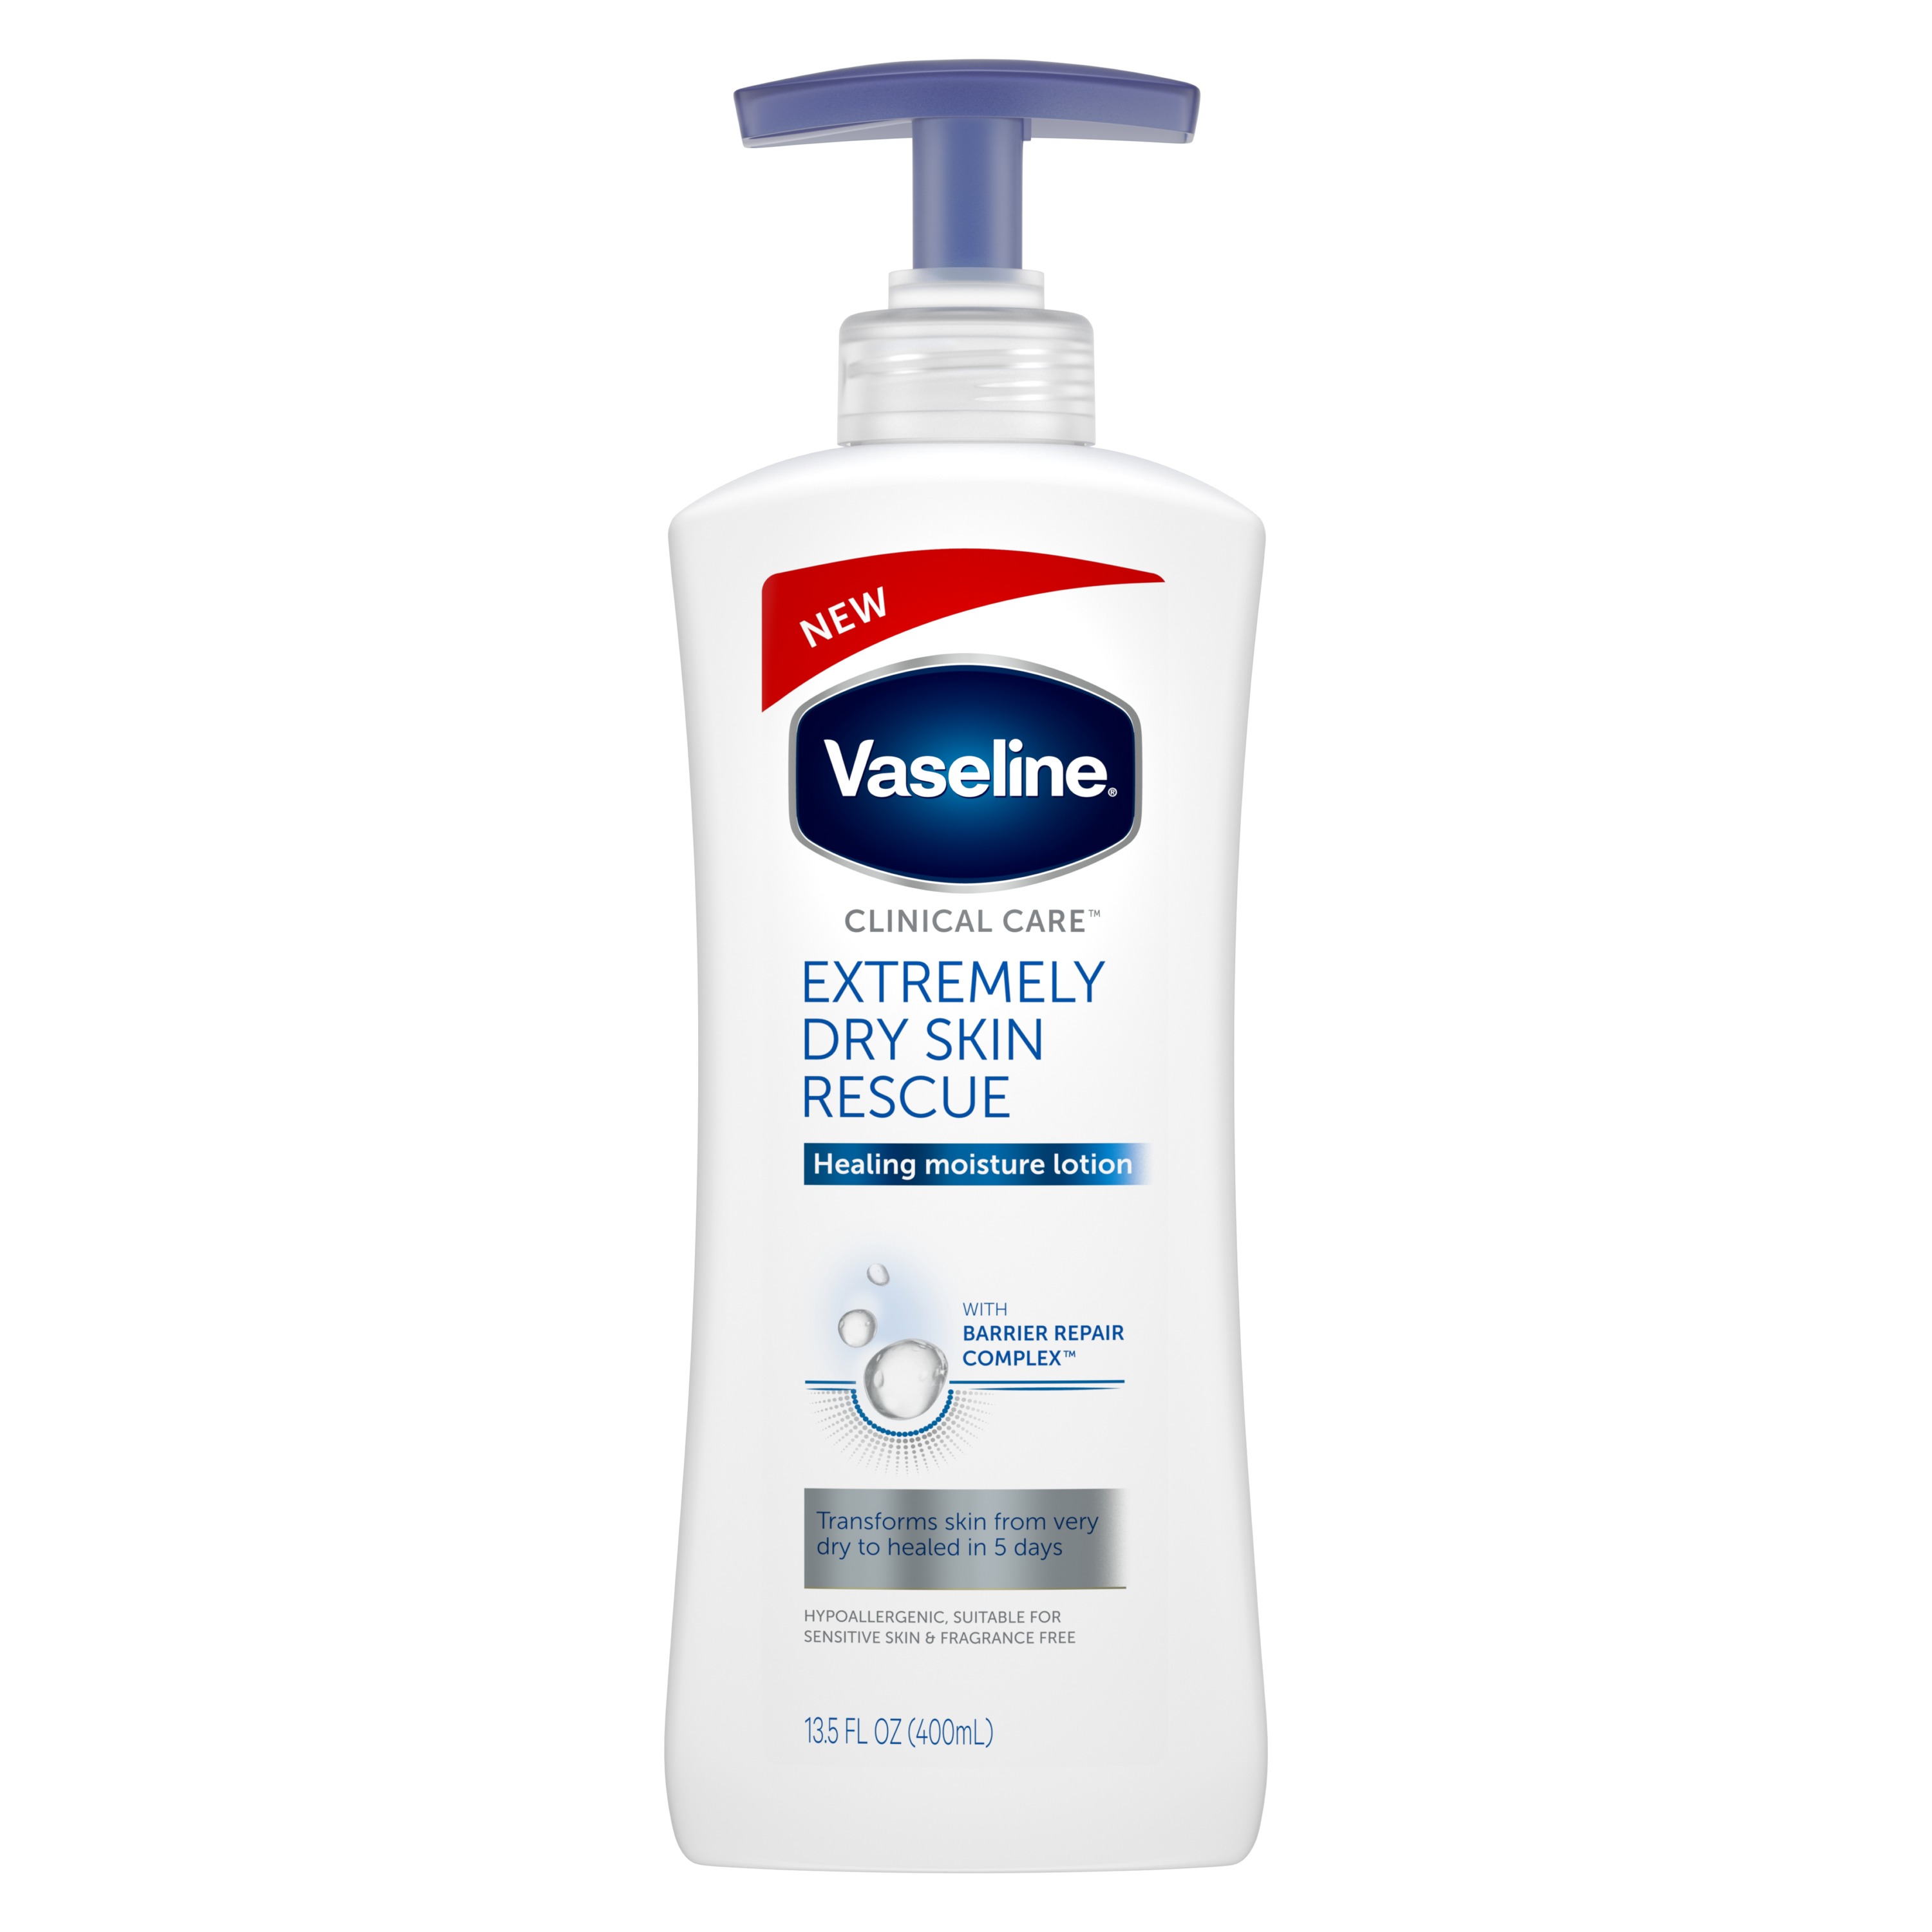 Vaseline Clinical Care hand and body lotion Extremely Dry Skin Rescue 13.5 oz - image 1 of 12